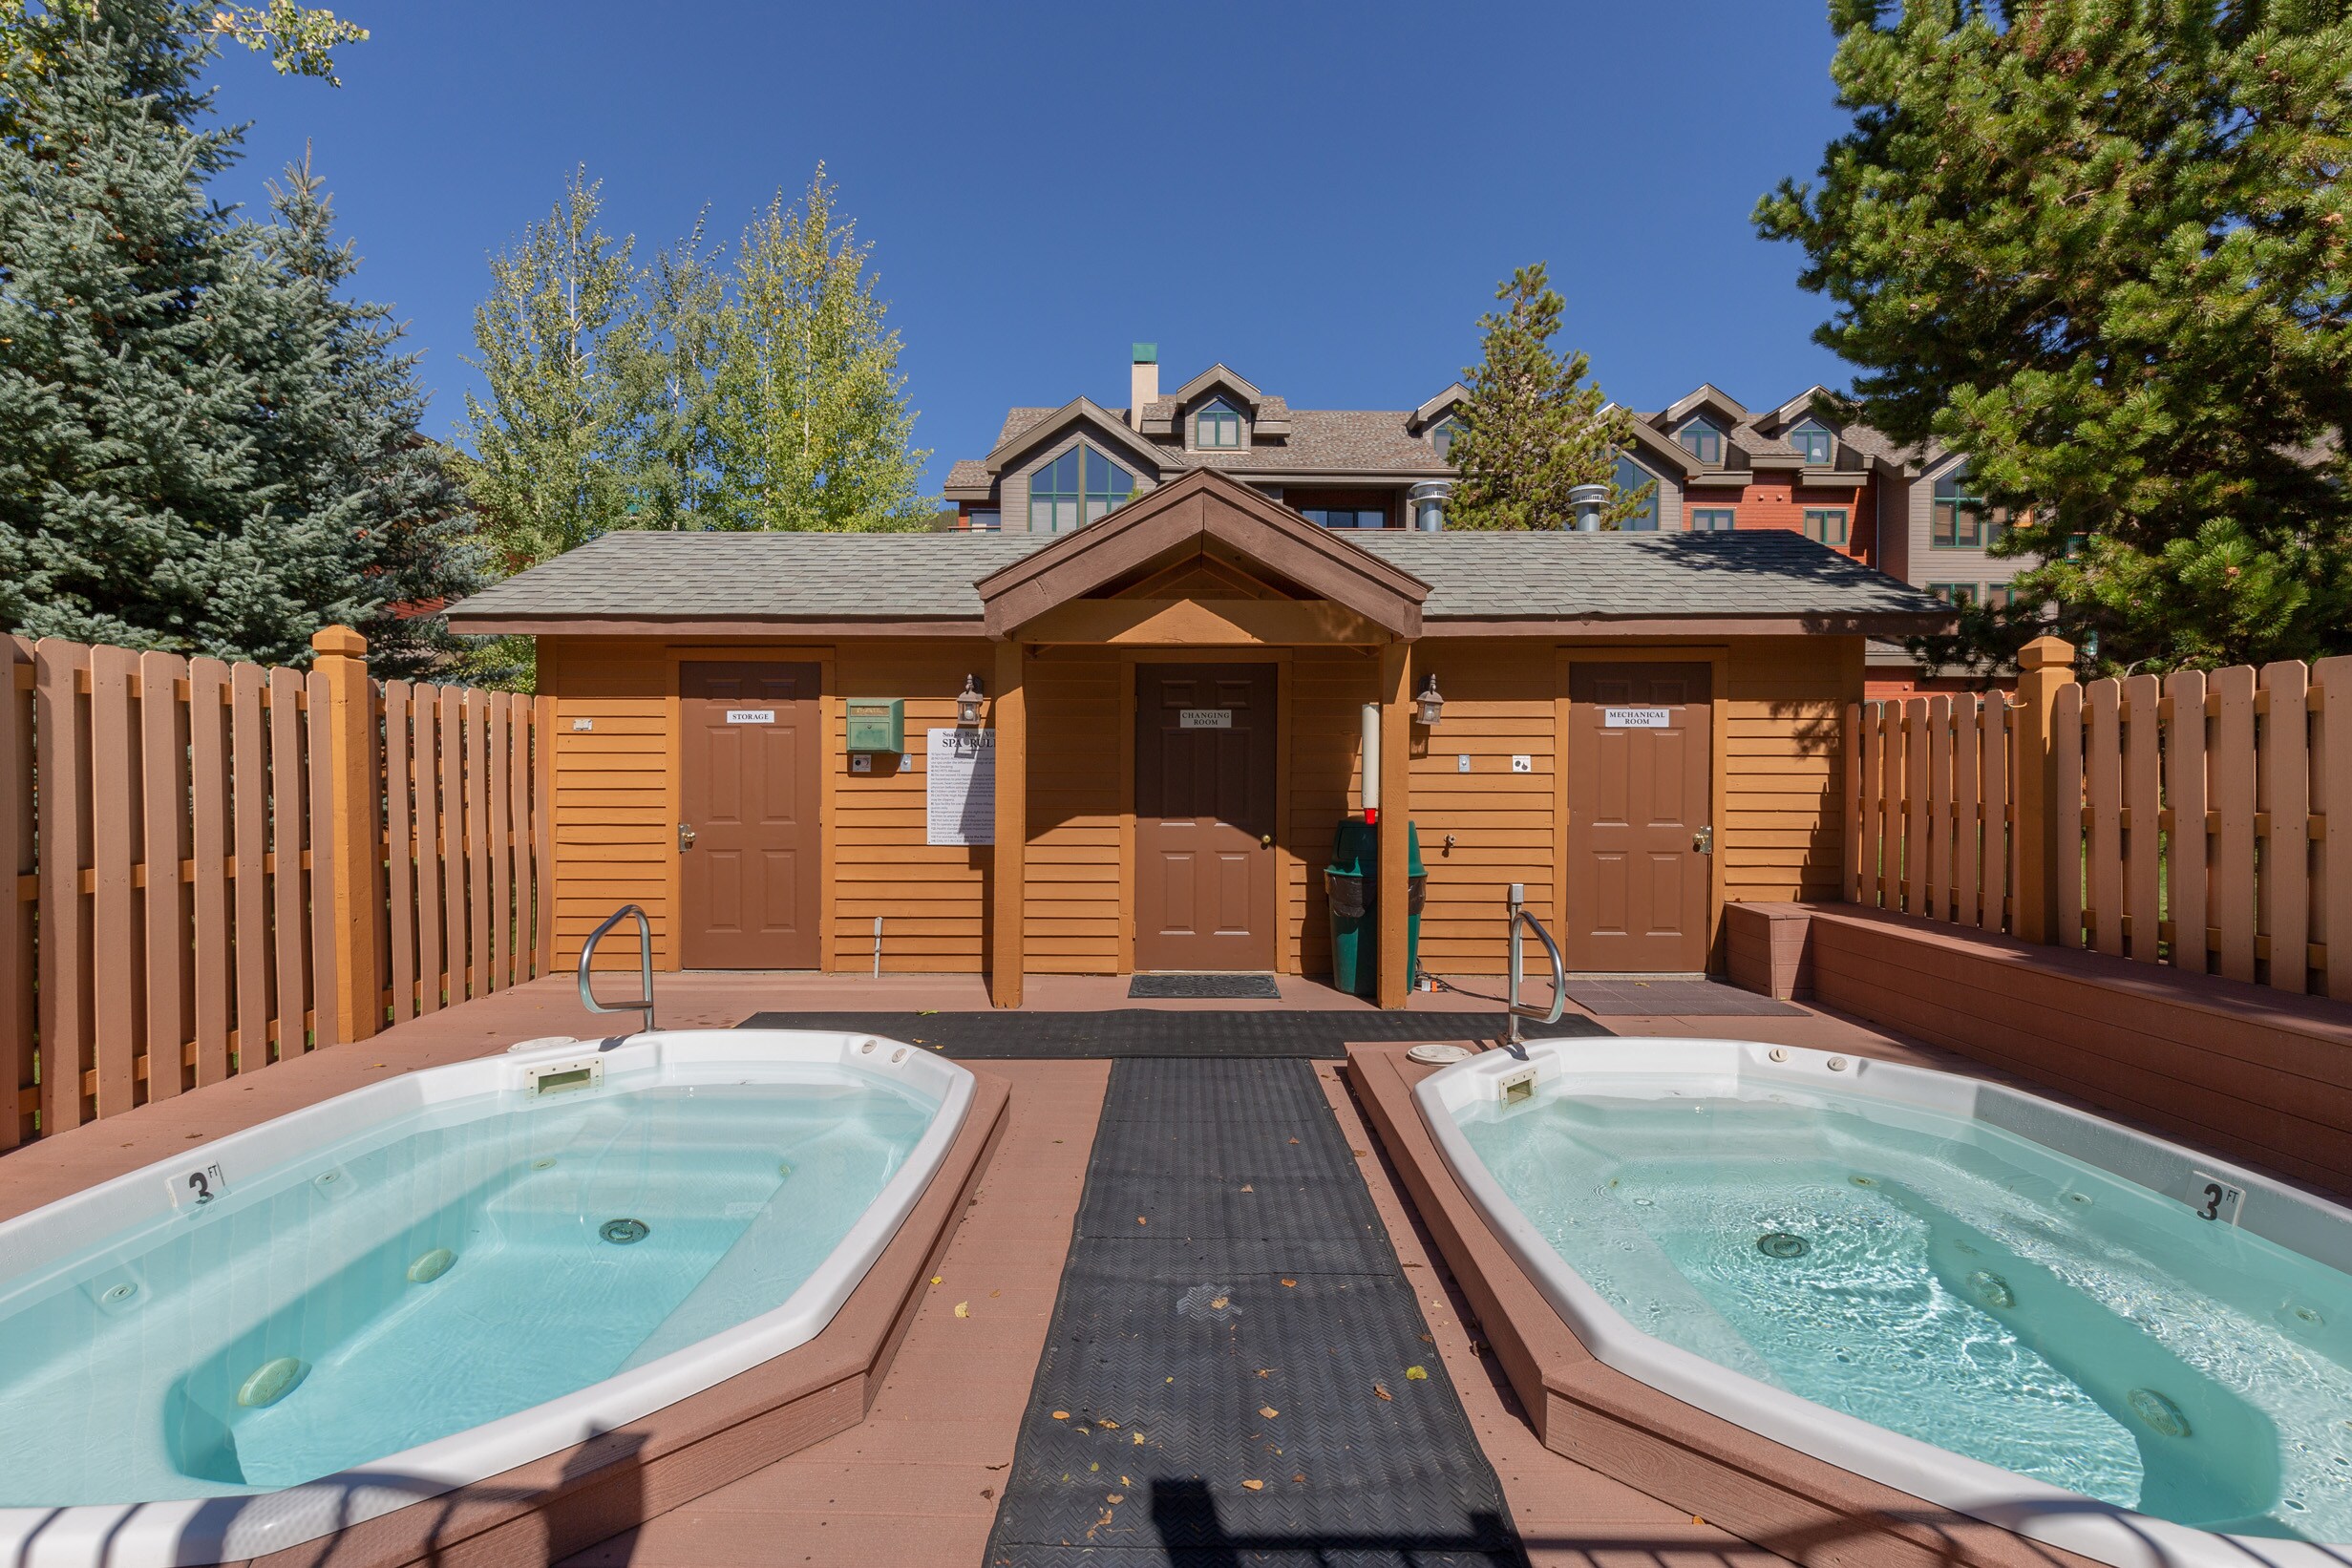 Shared hot tubs for guest use. 